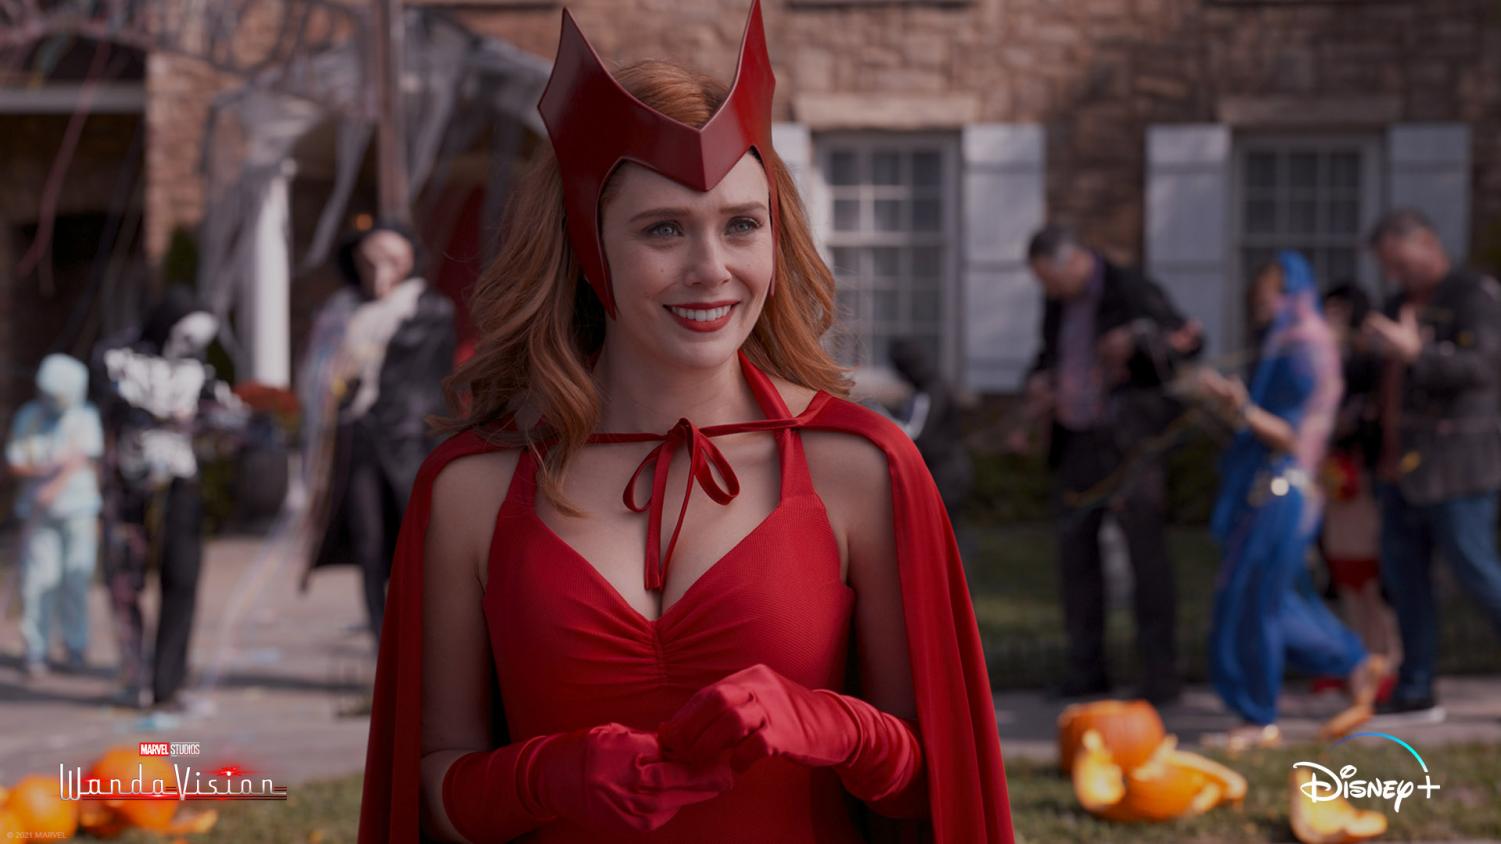 In episode 6s Halloween Spooktacular, Wandas decked out in a classic Scarlet Witch costume as an homage to Marvel comics. But to fit the sitcom reality, she says shes dressed as a Sokovian fortune teller. (Marvel Studios/WandaVision)